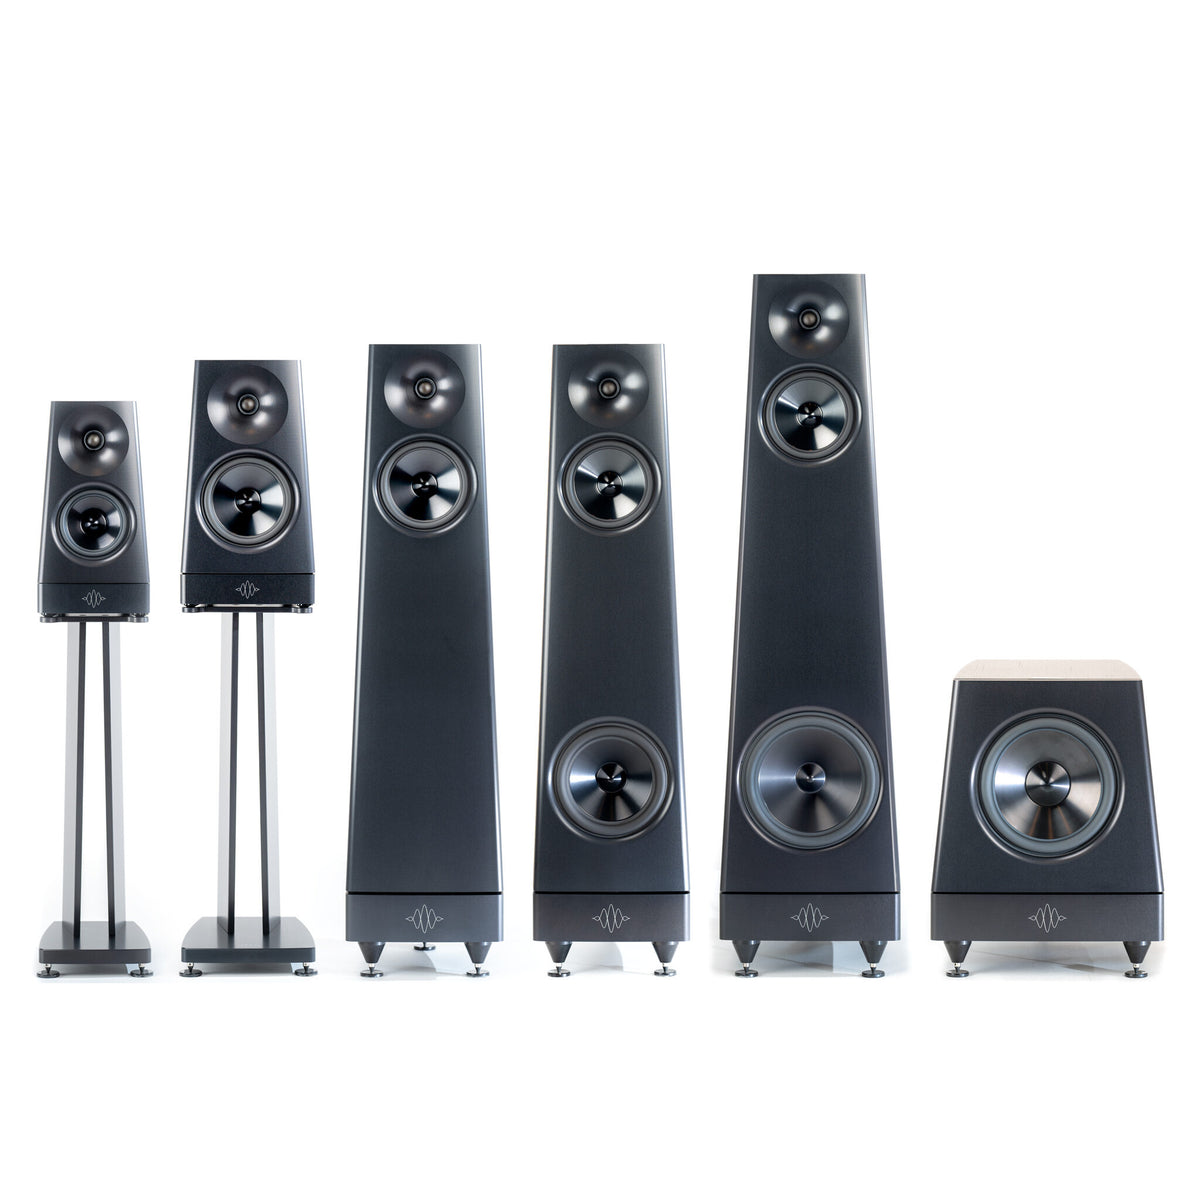 YG Acoustics announces an exciting  new series of loudspeakers… Peaks